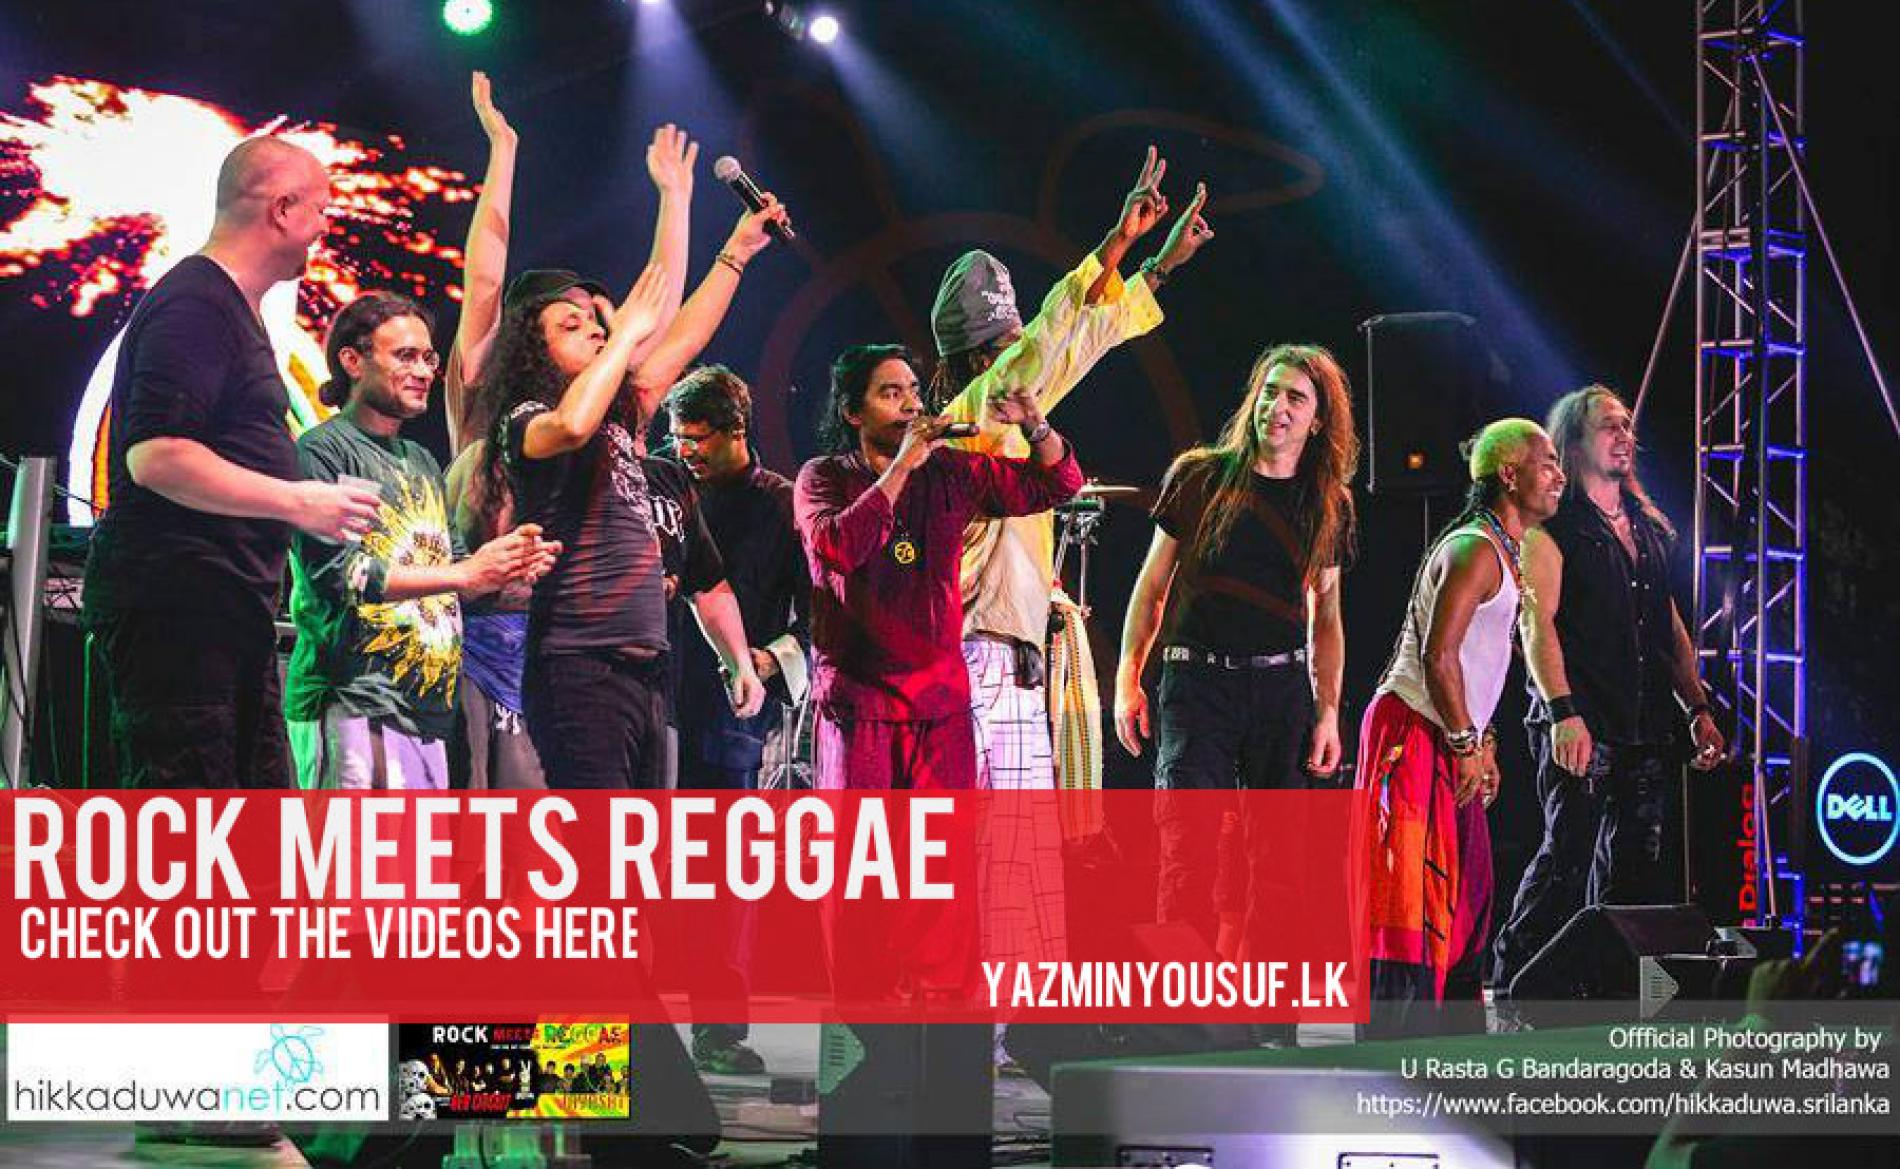 Rock Meets Reggae: A Few Awesome Moments